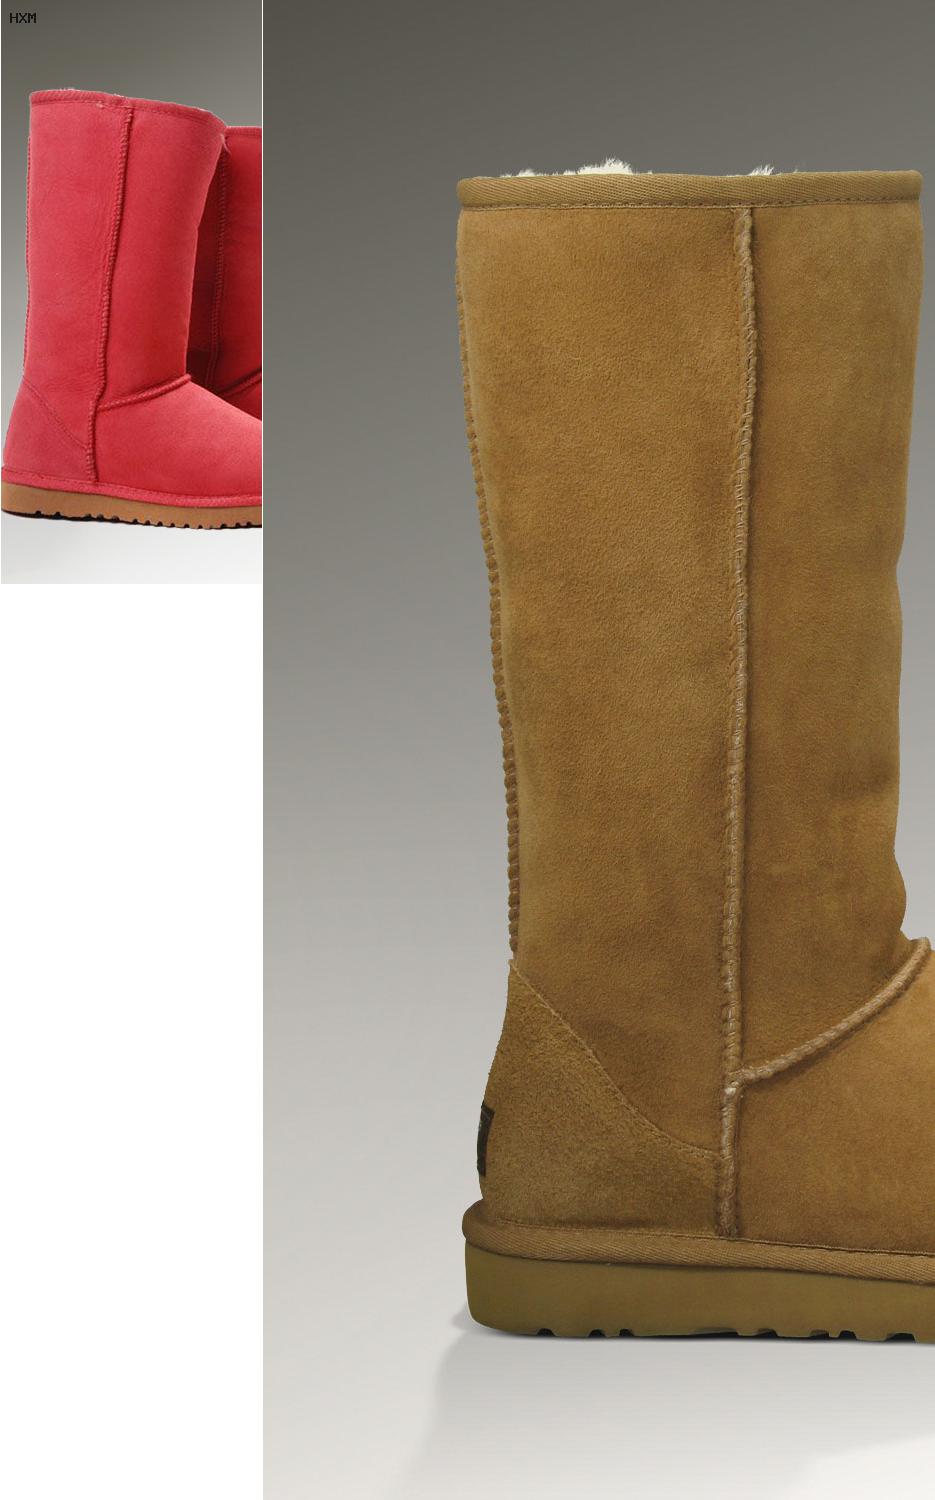 difference vrai fausse ugg